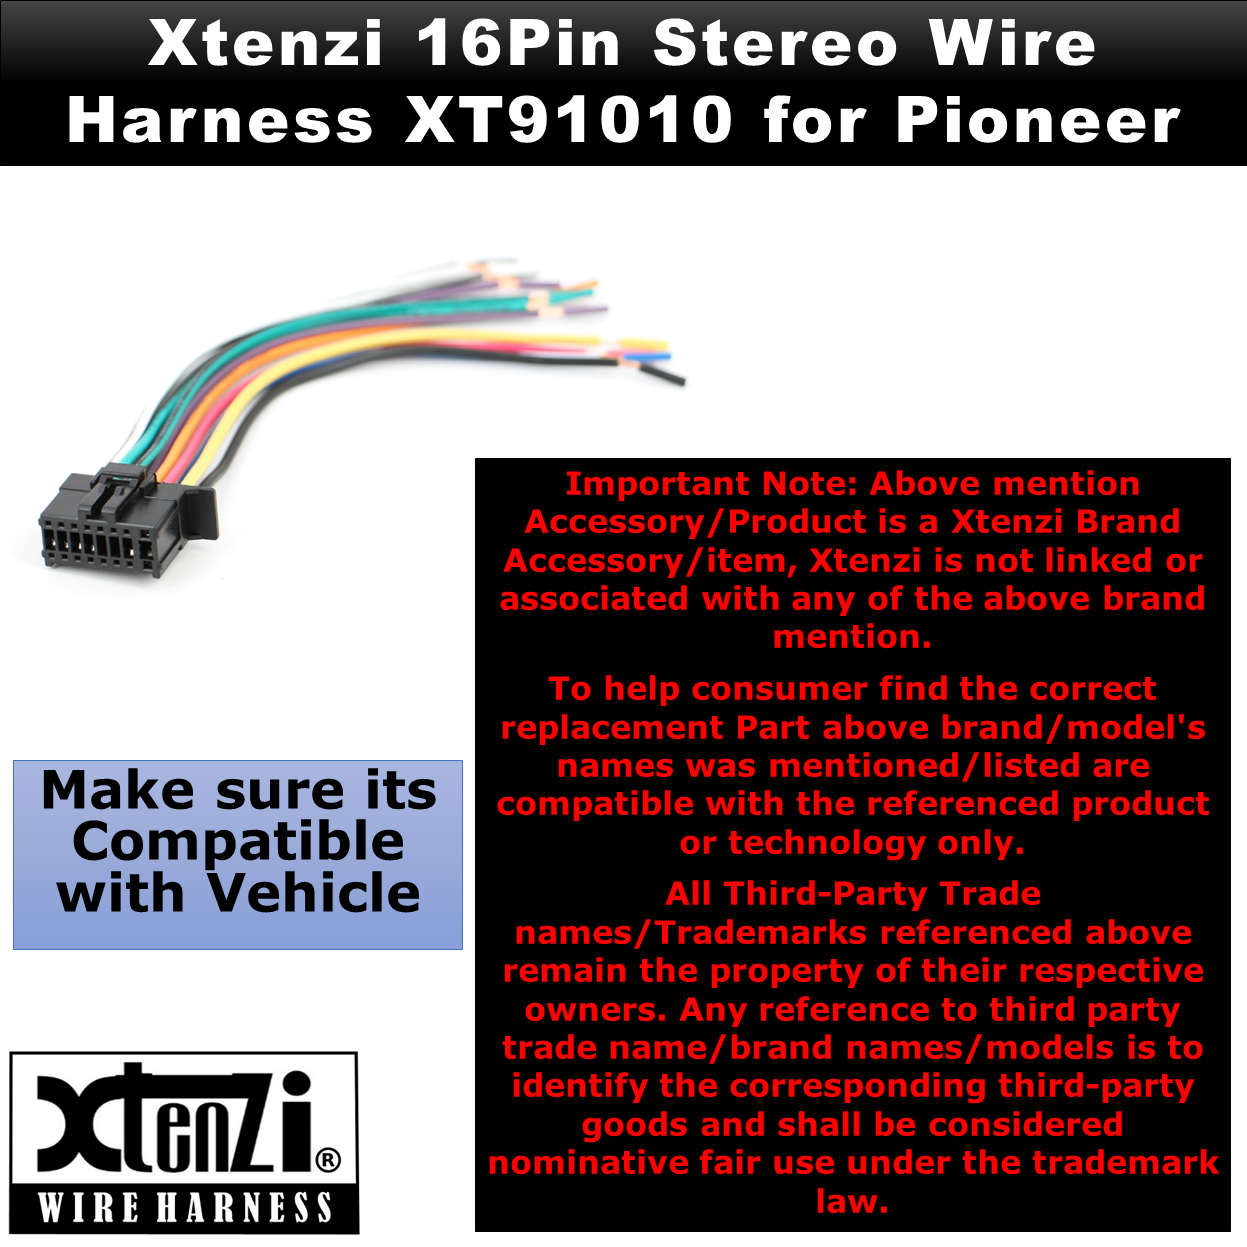 Xtenzi 16Pin Car Radio Power Wire Harness Connector for Pioneer DEH-1300M DEH-2200UB & More - XT91010